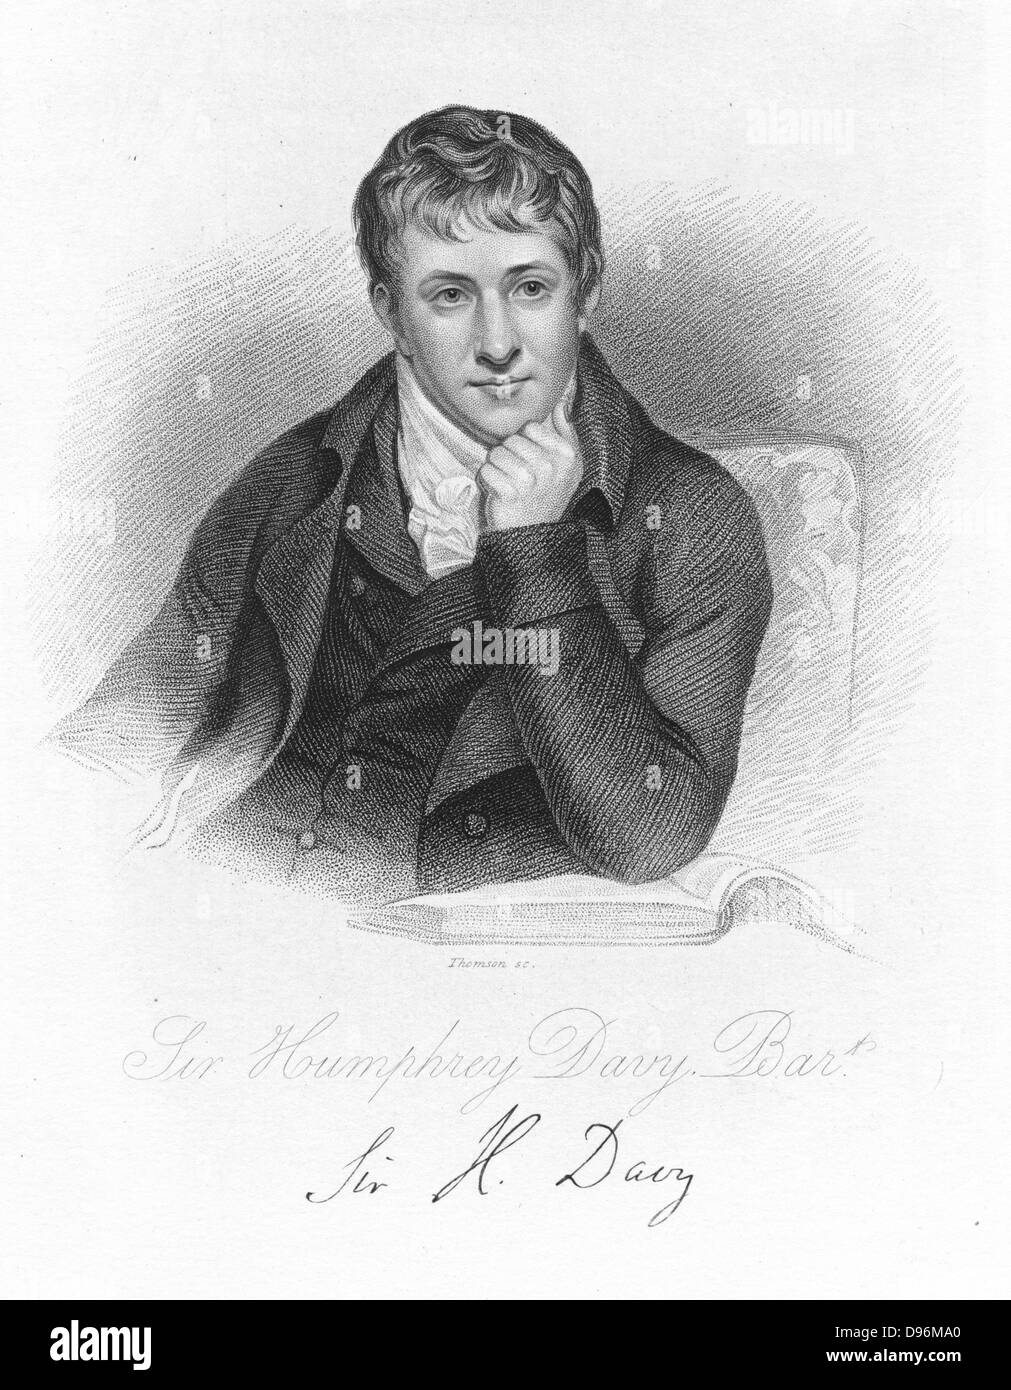 Humphry Davy (1778-1829) English chemist. Engraving Stock Photo